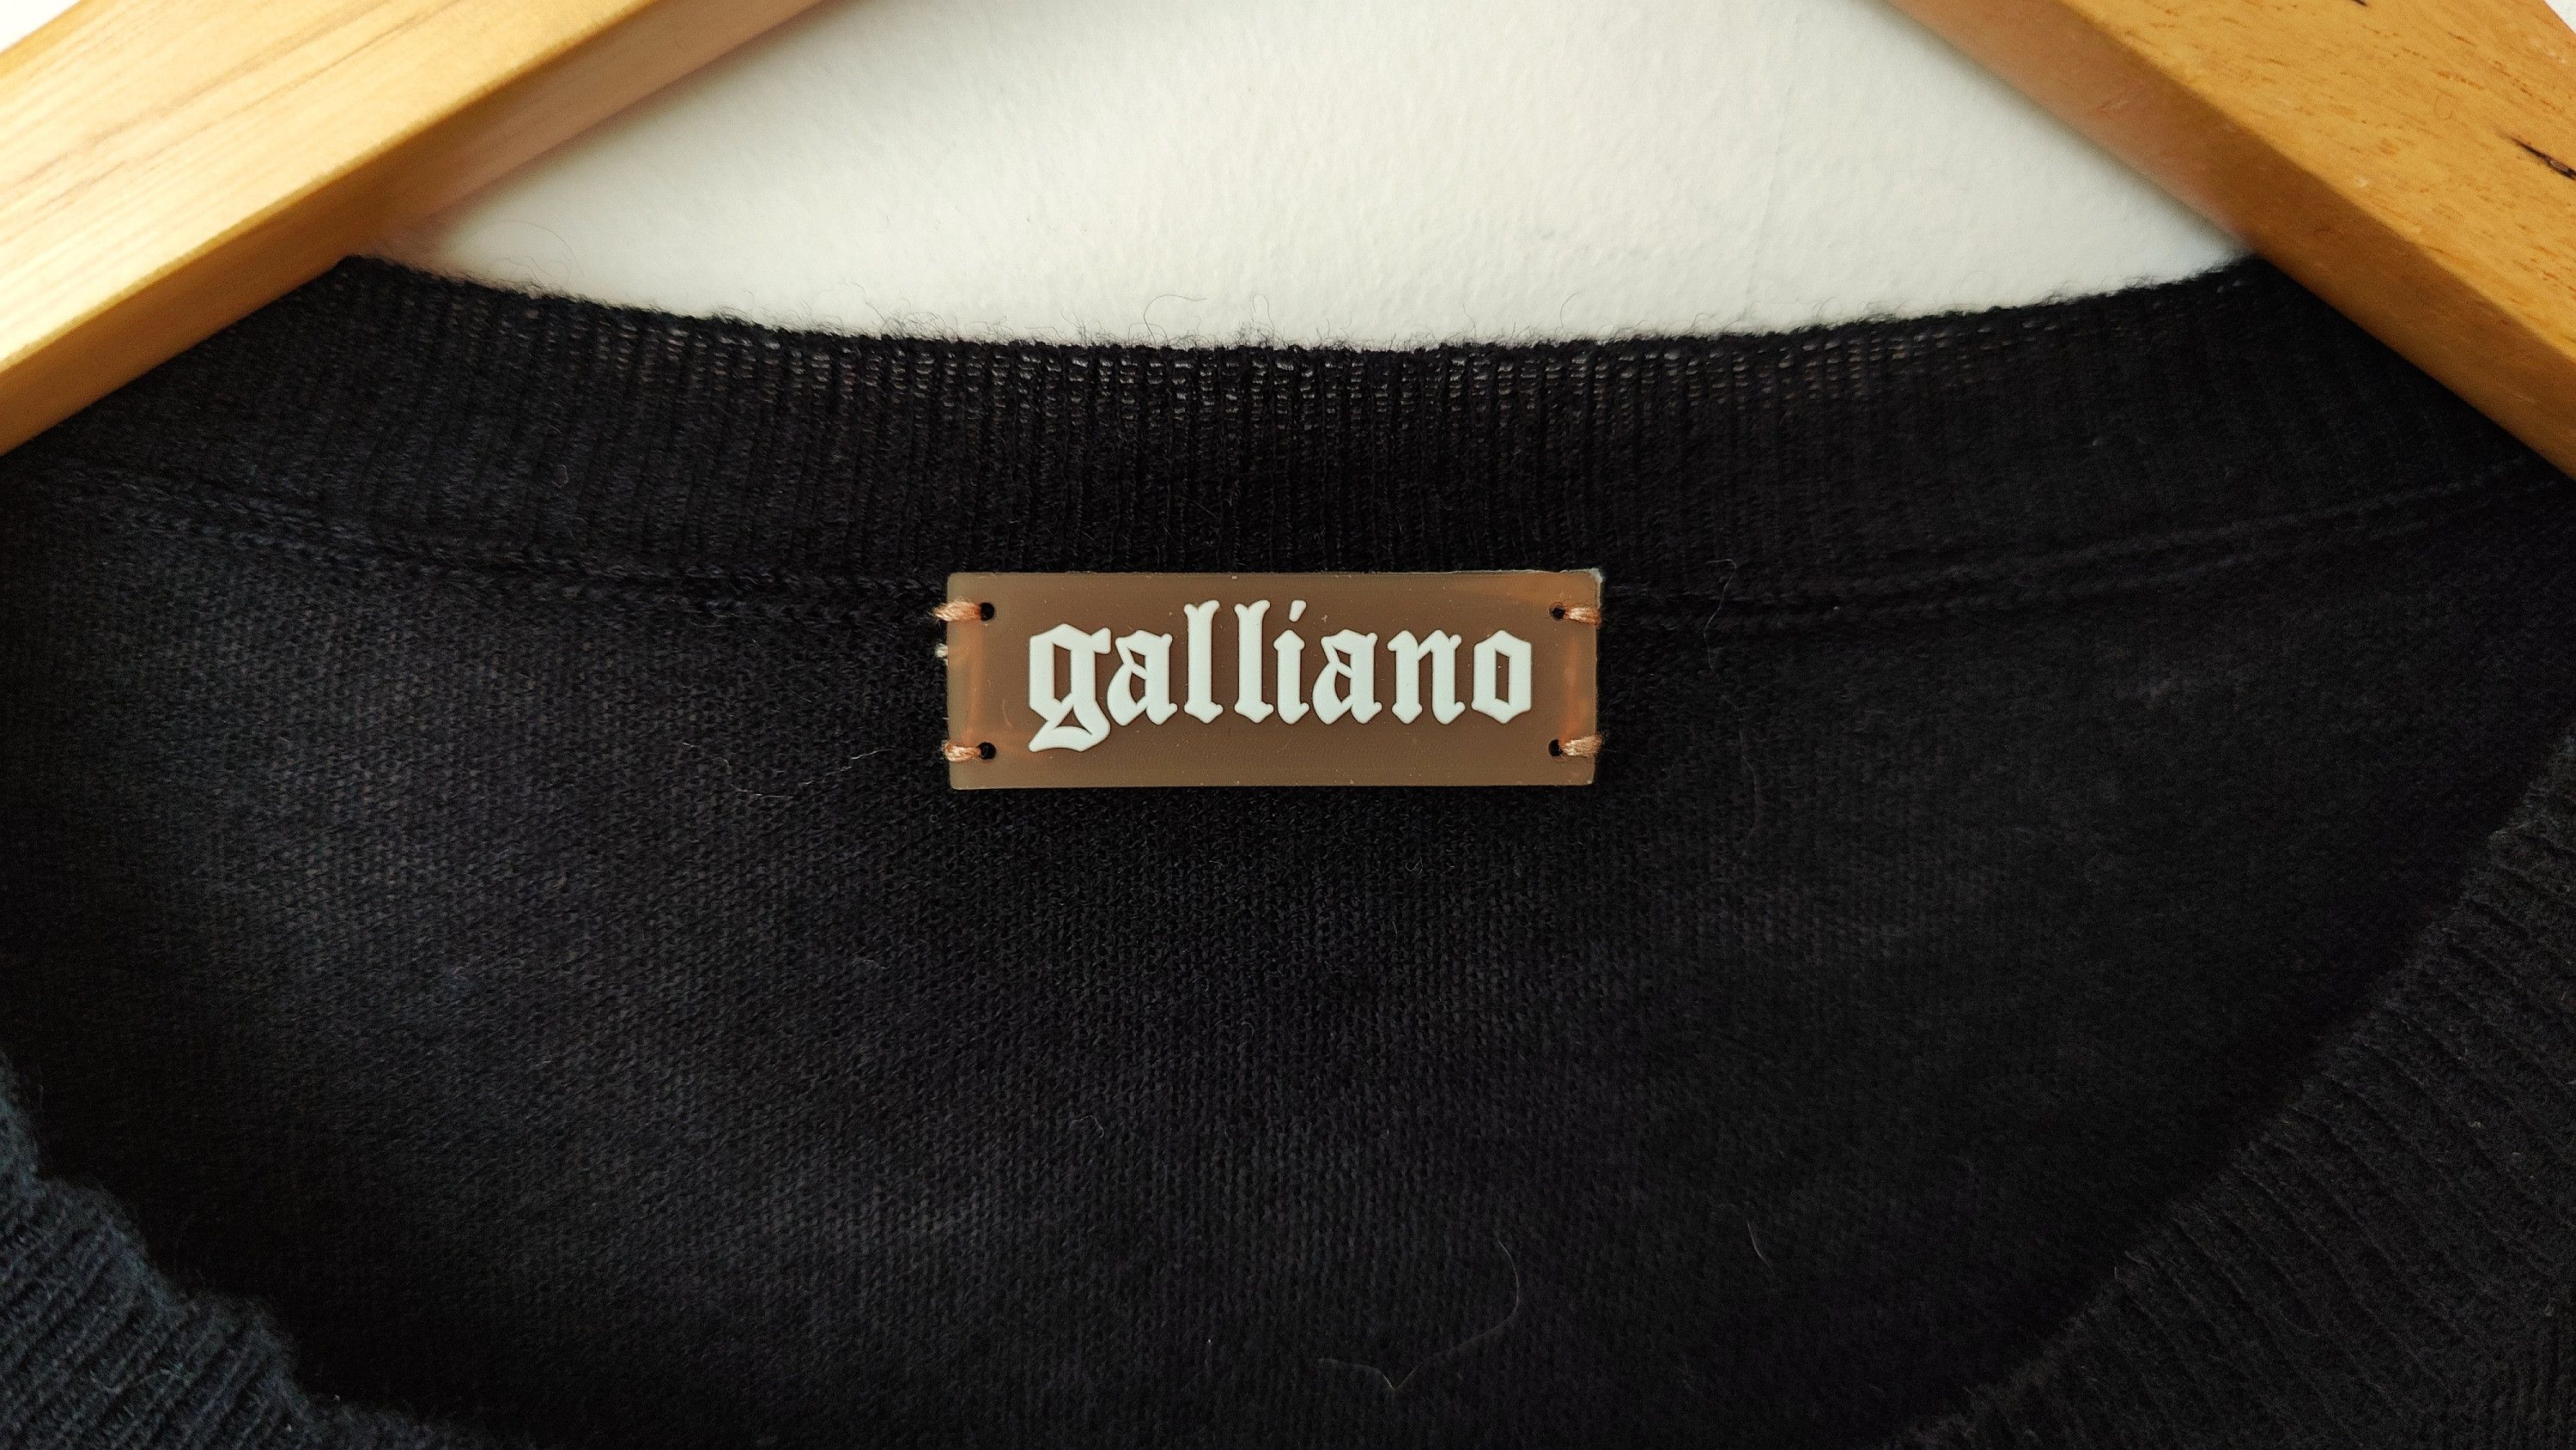 Archival Clothing John Galliano Archival 2011 Black Wool Knitted Sweater Size US S / EU 44-46 / 1 - 3 Thumbnail